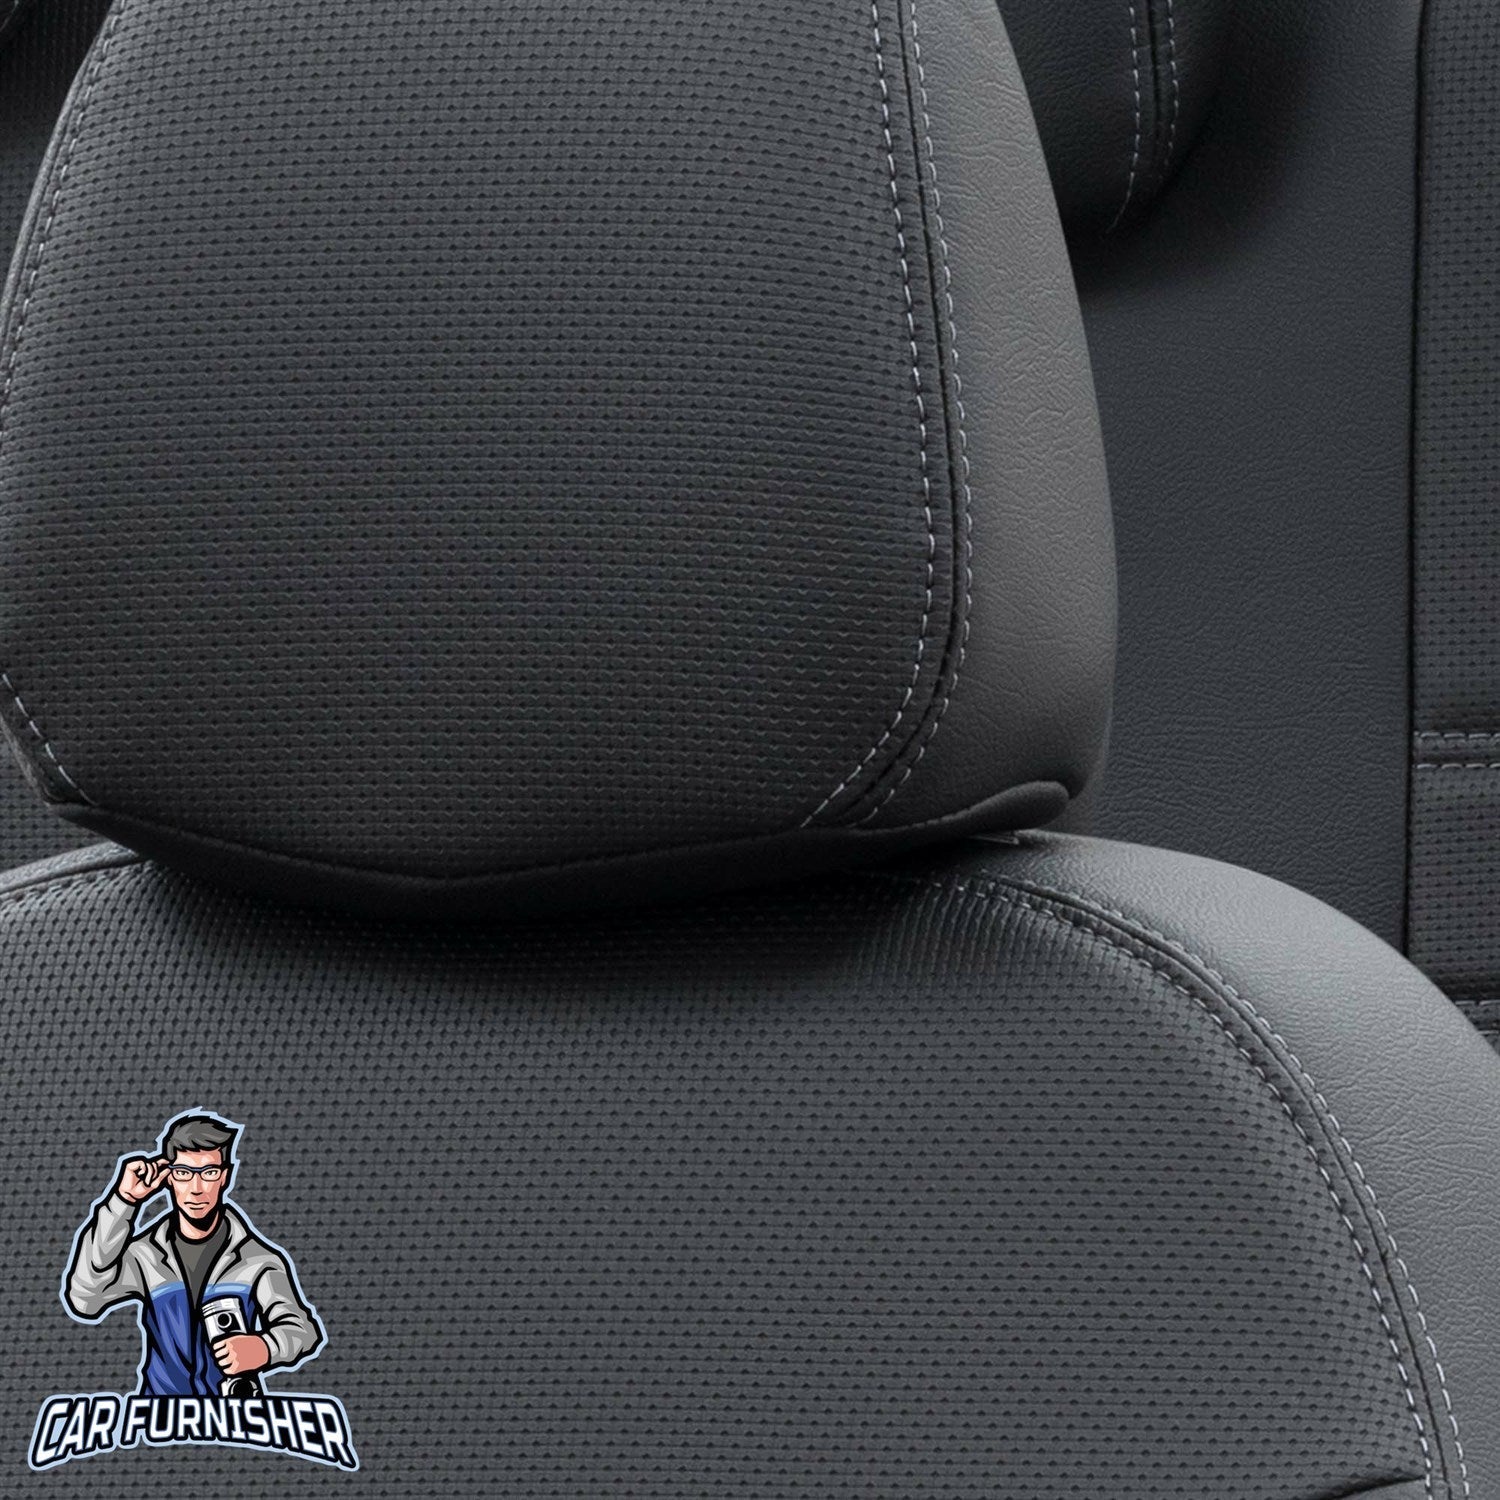 Volkswagen Sharan Seat Cover New York Leather Design Black Leather